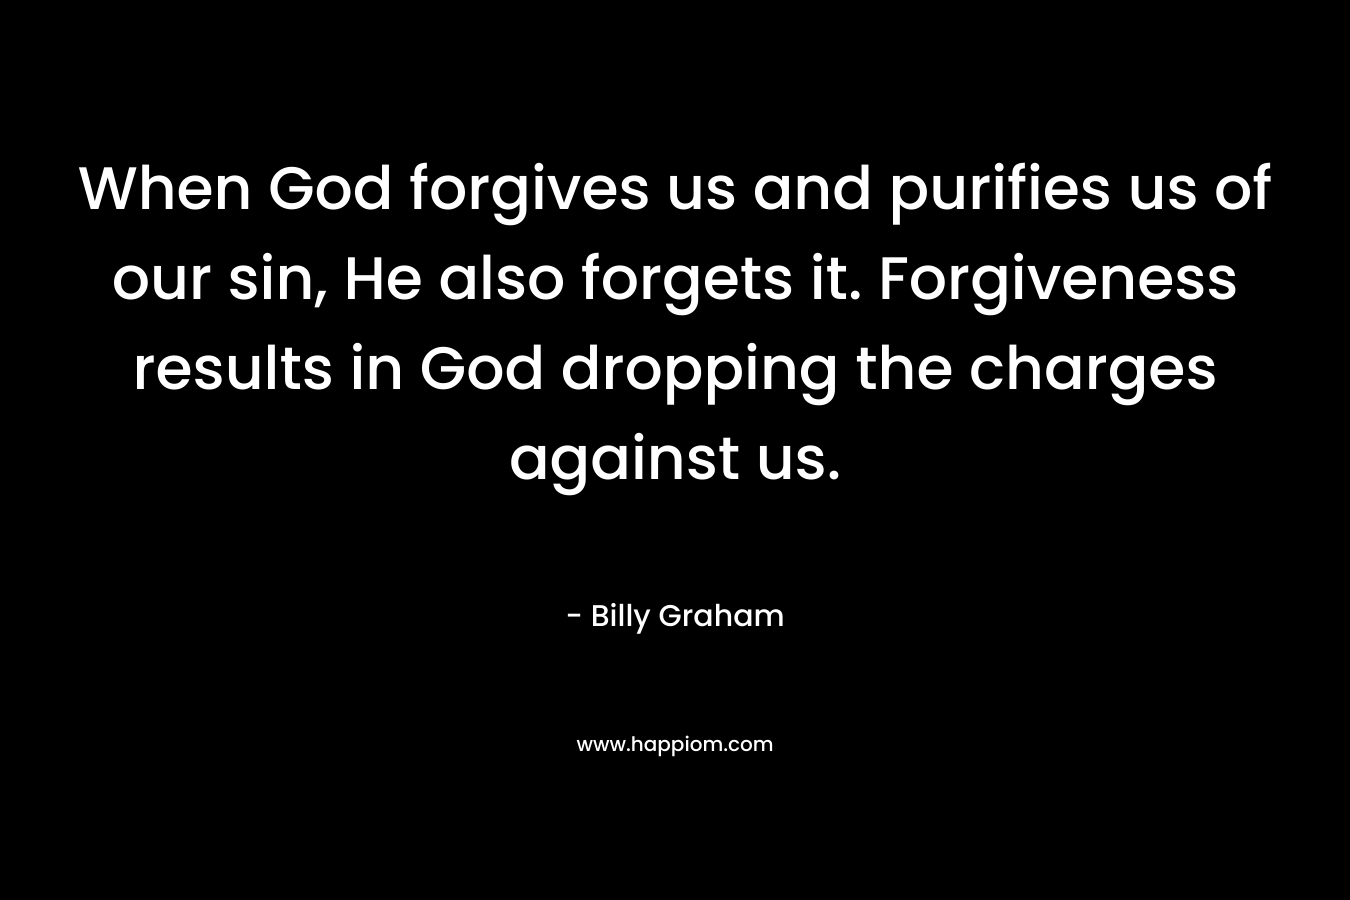 When God forgives us and purifies us of our sin, He also forgets it. Forgiveness results in God dropping the charges against us.